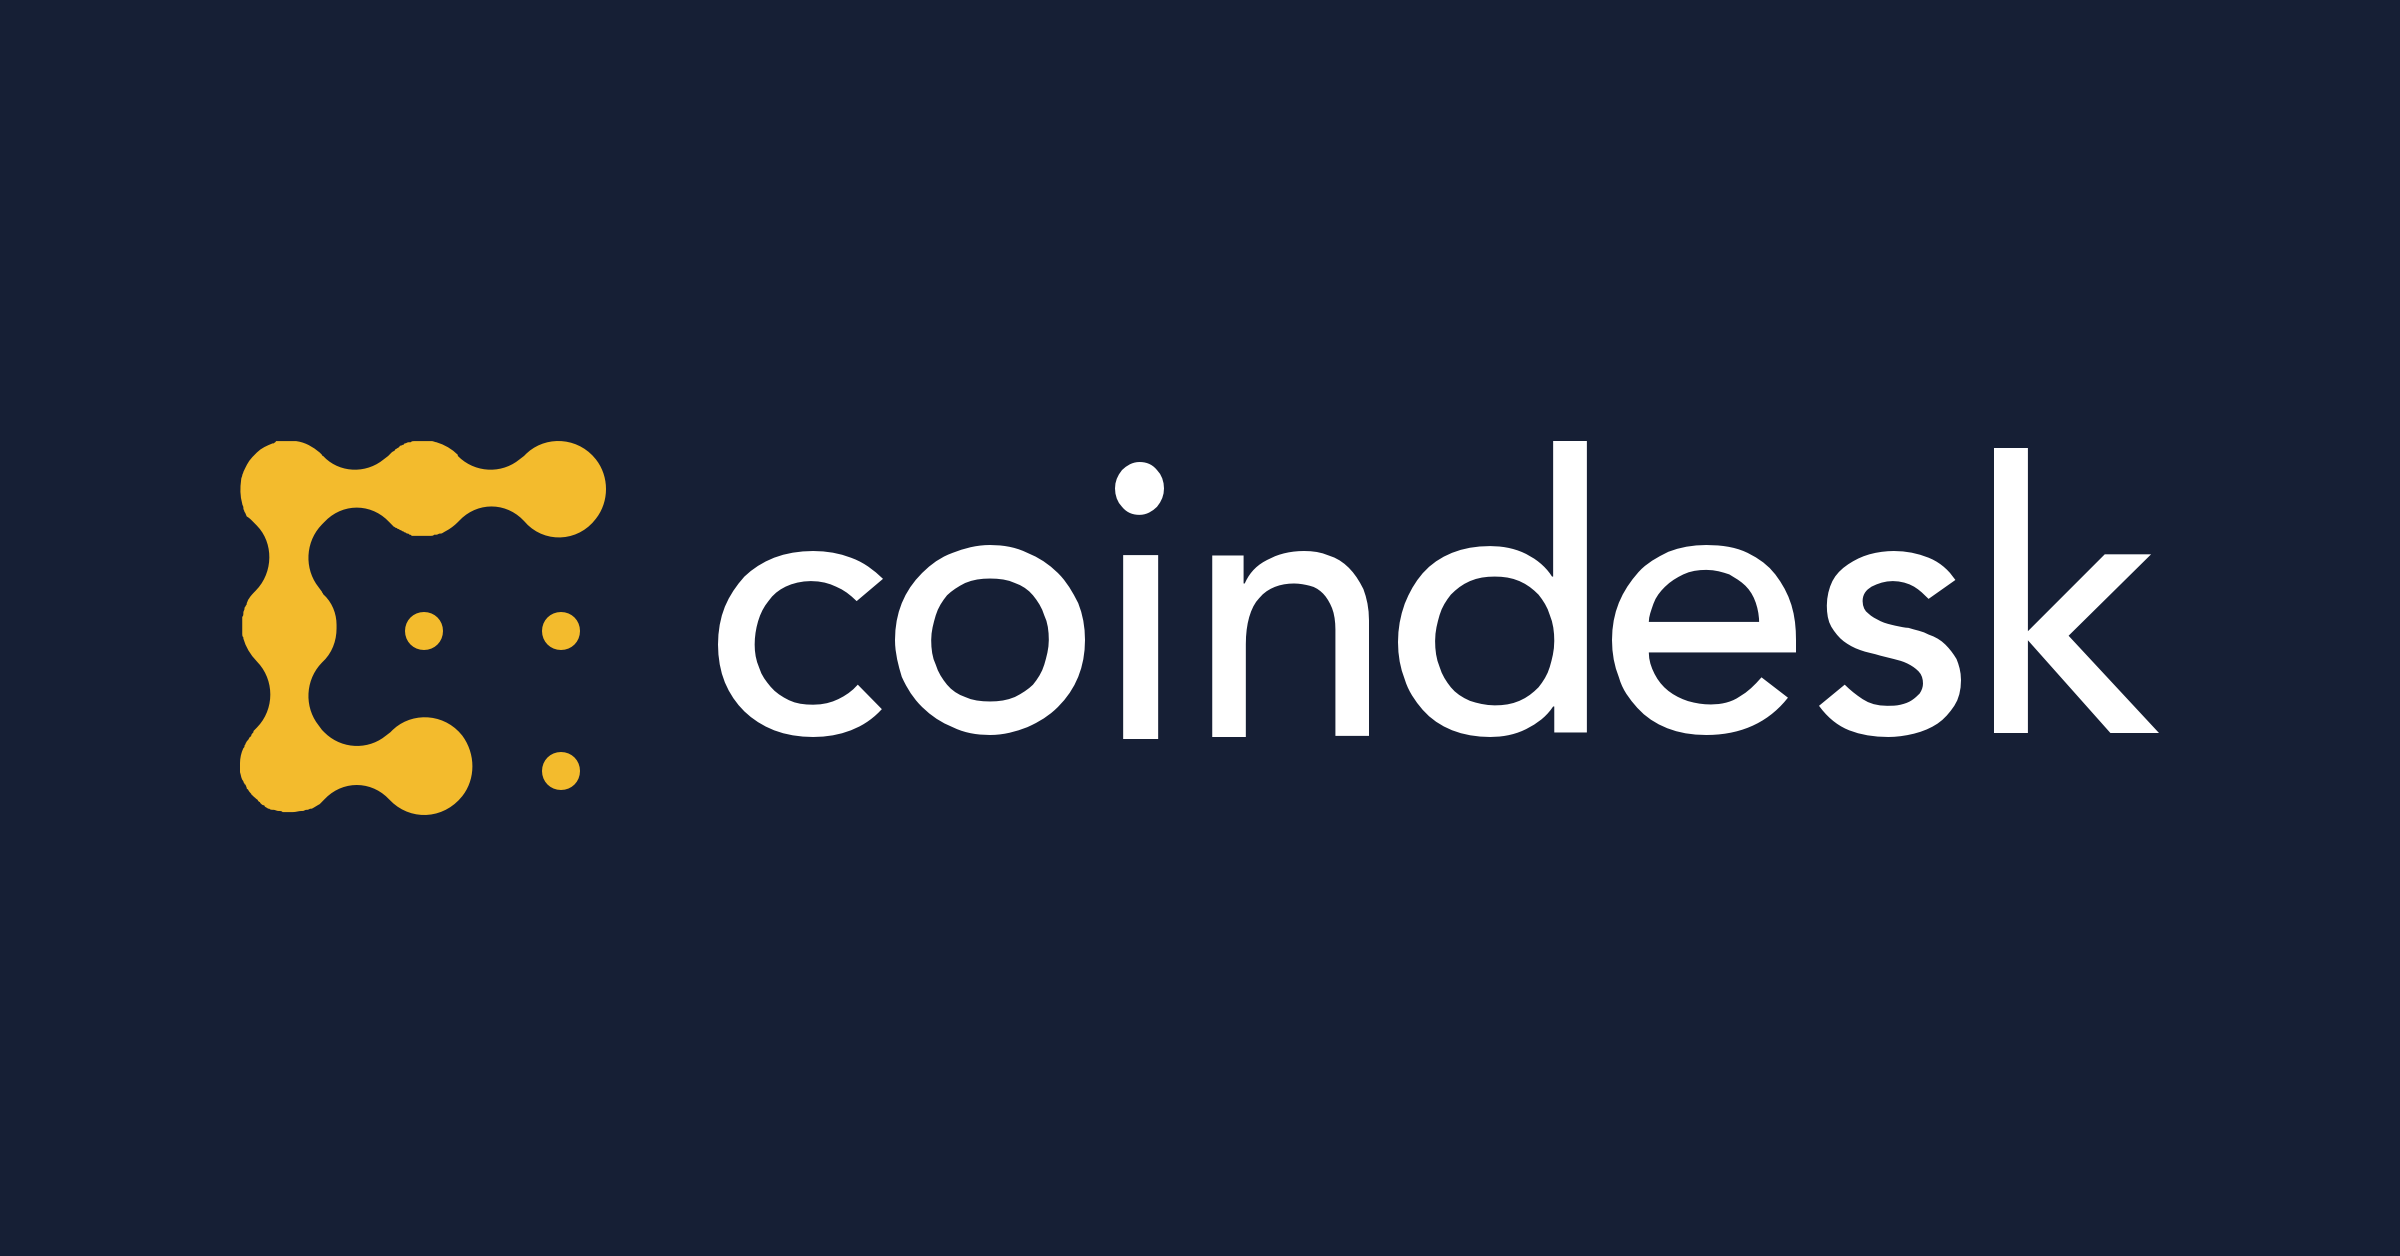 Automated-crypto-investing-app-coinseed-faces-fraud-charges-in-ny,-sec-suits